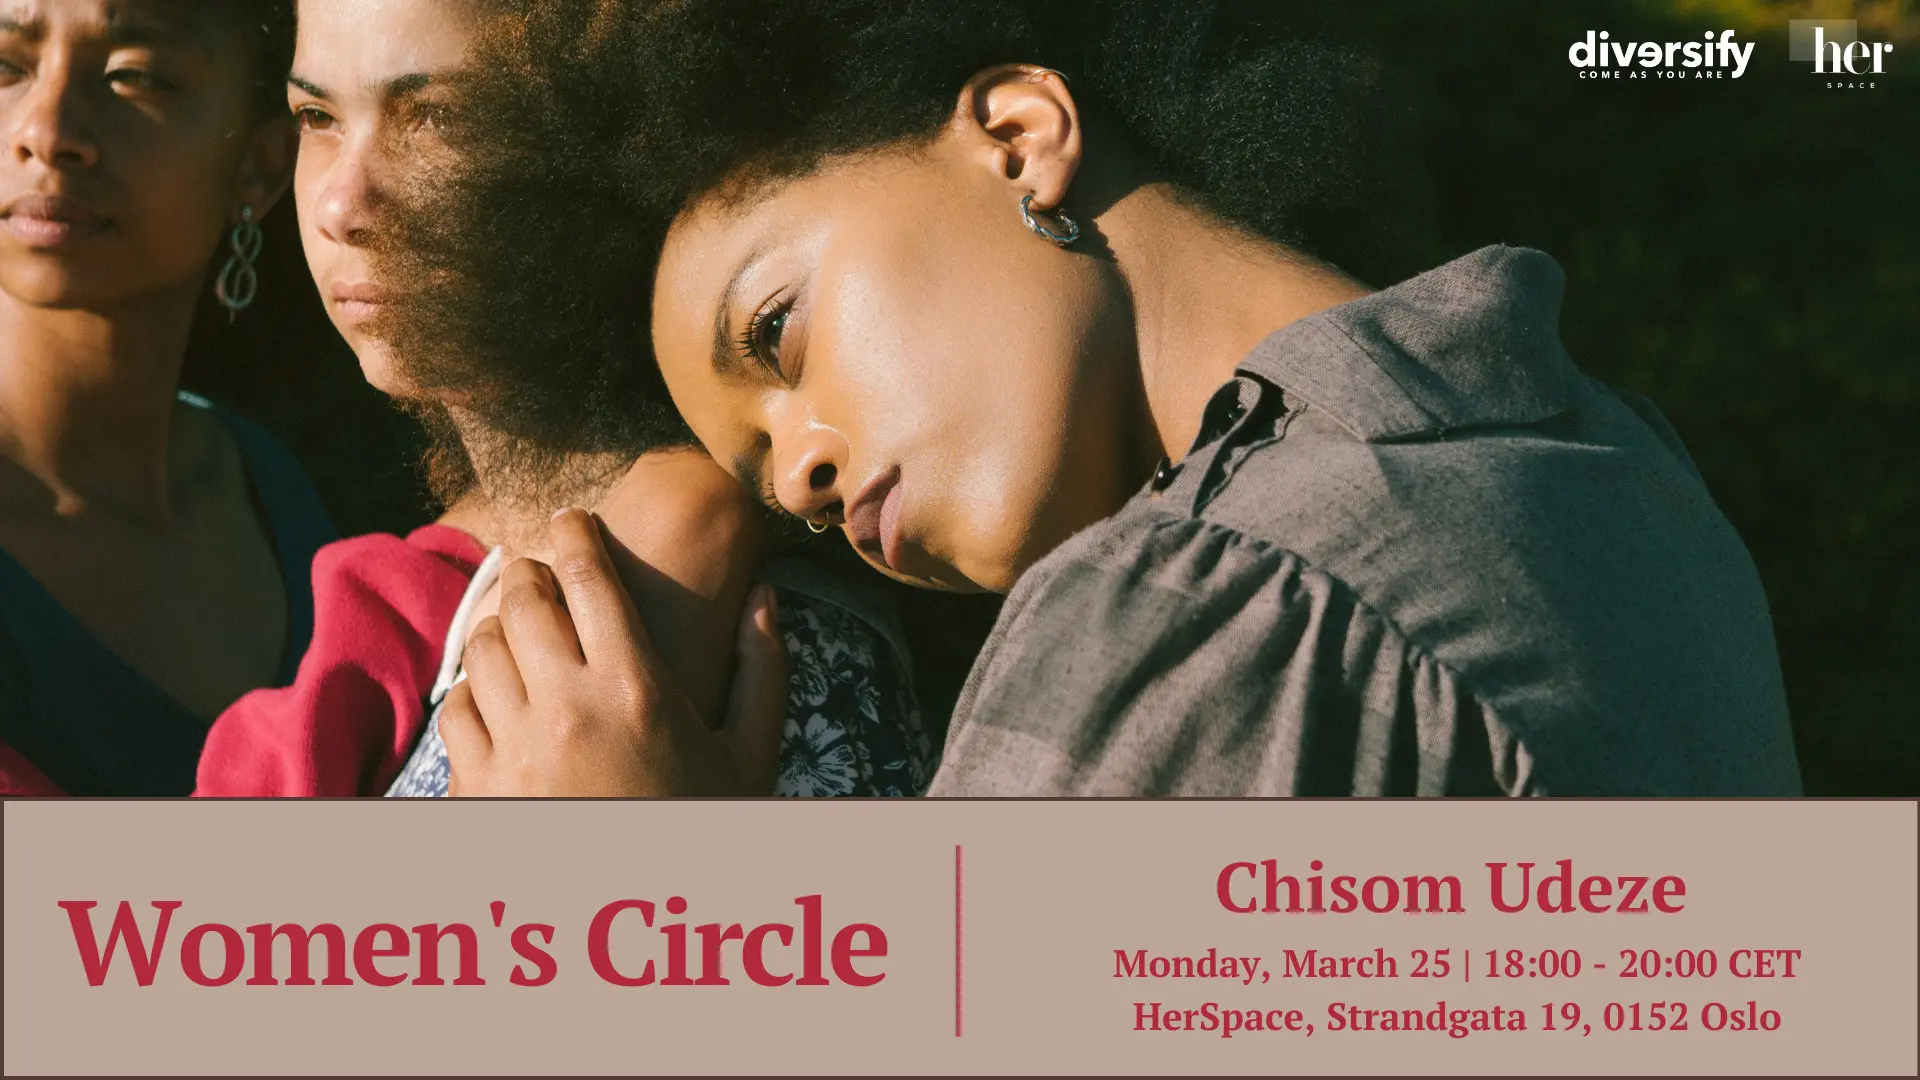 Poster for Women's circle with dark pink text featuring three women standing together.